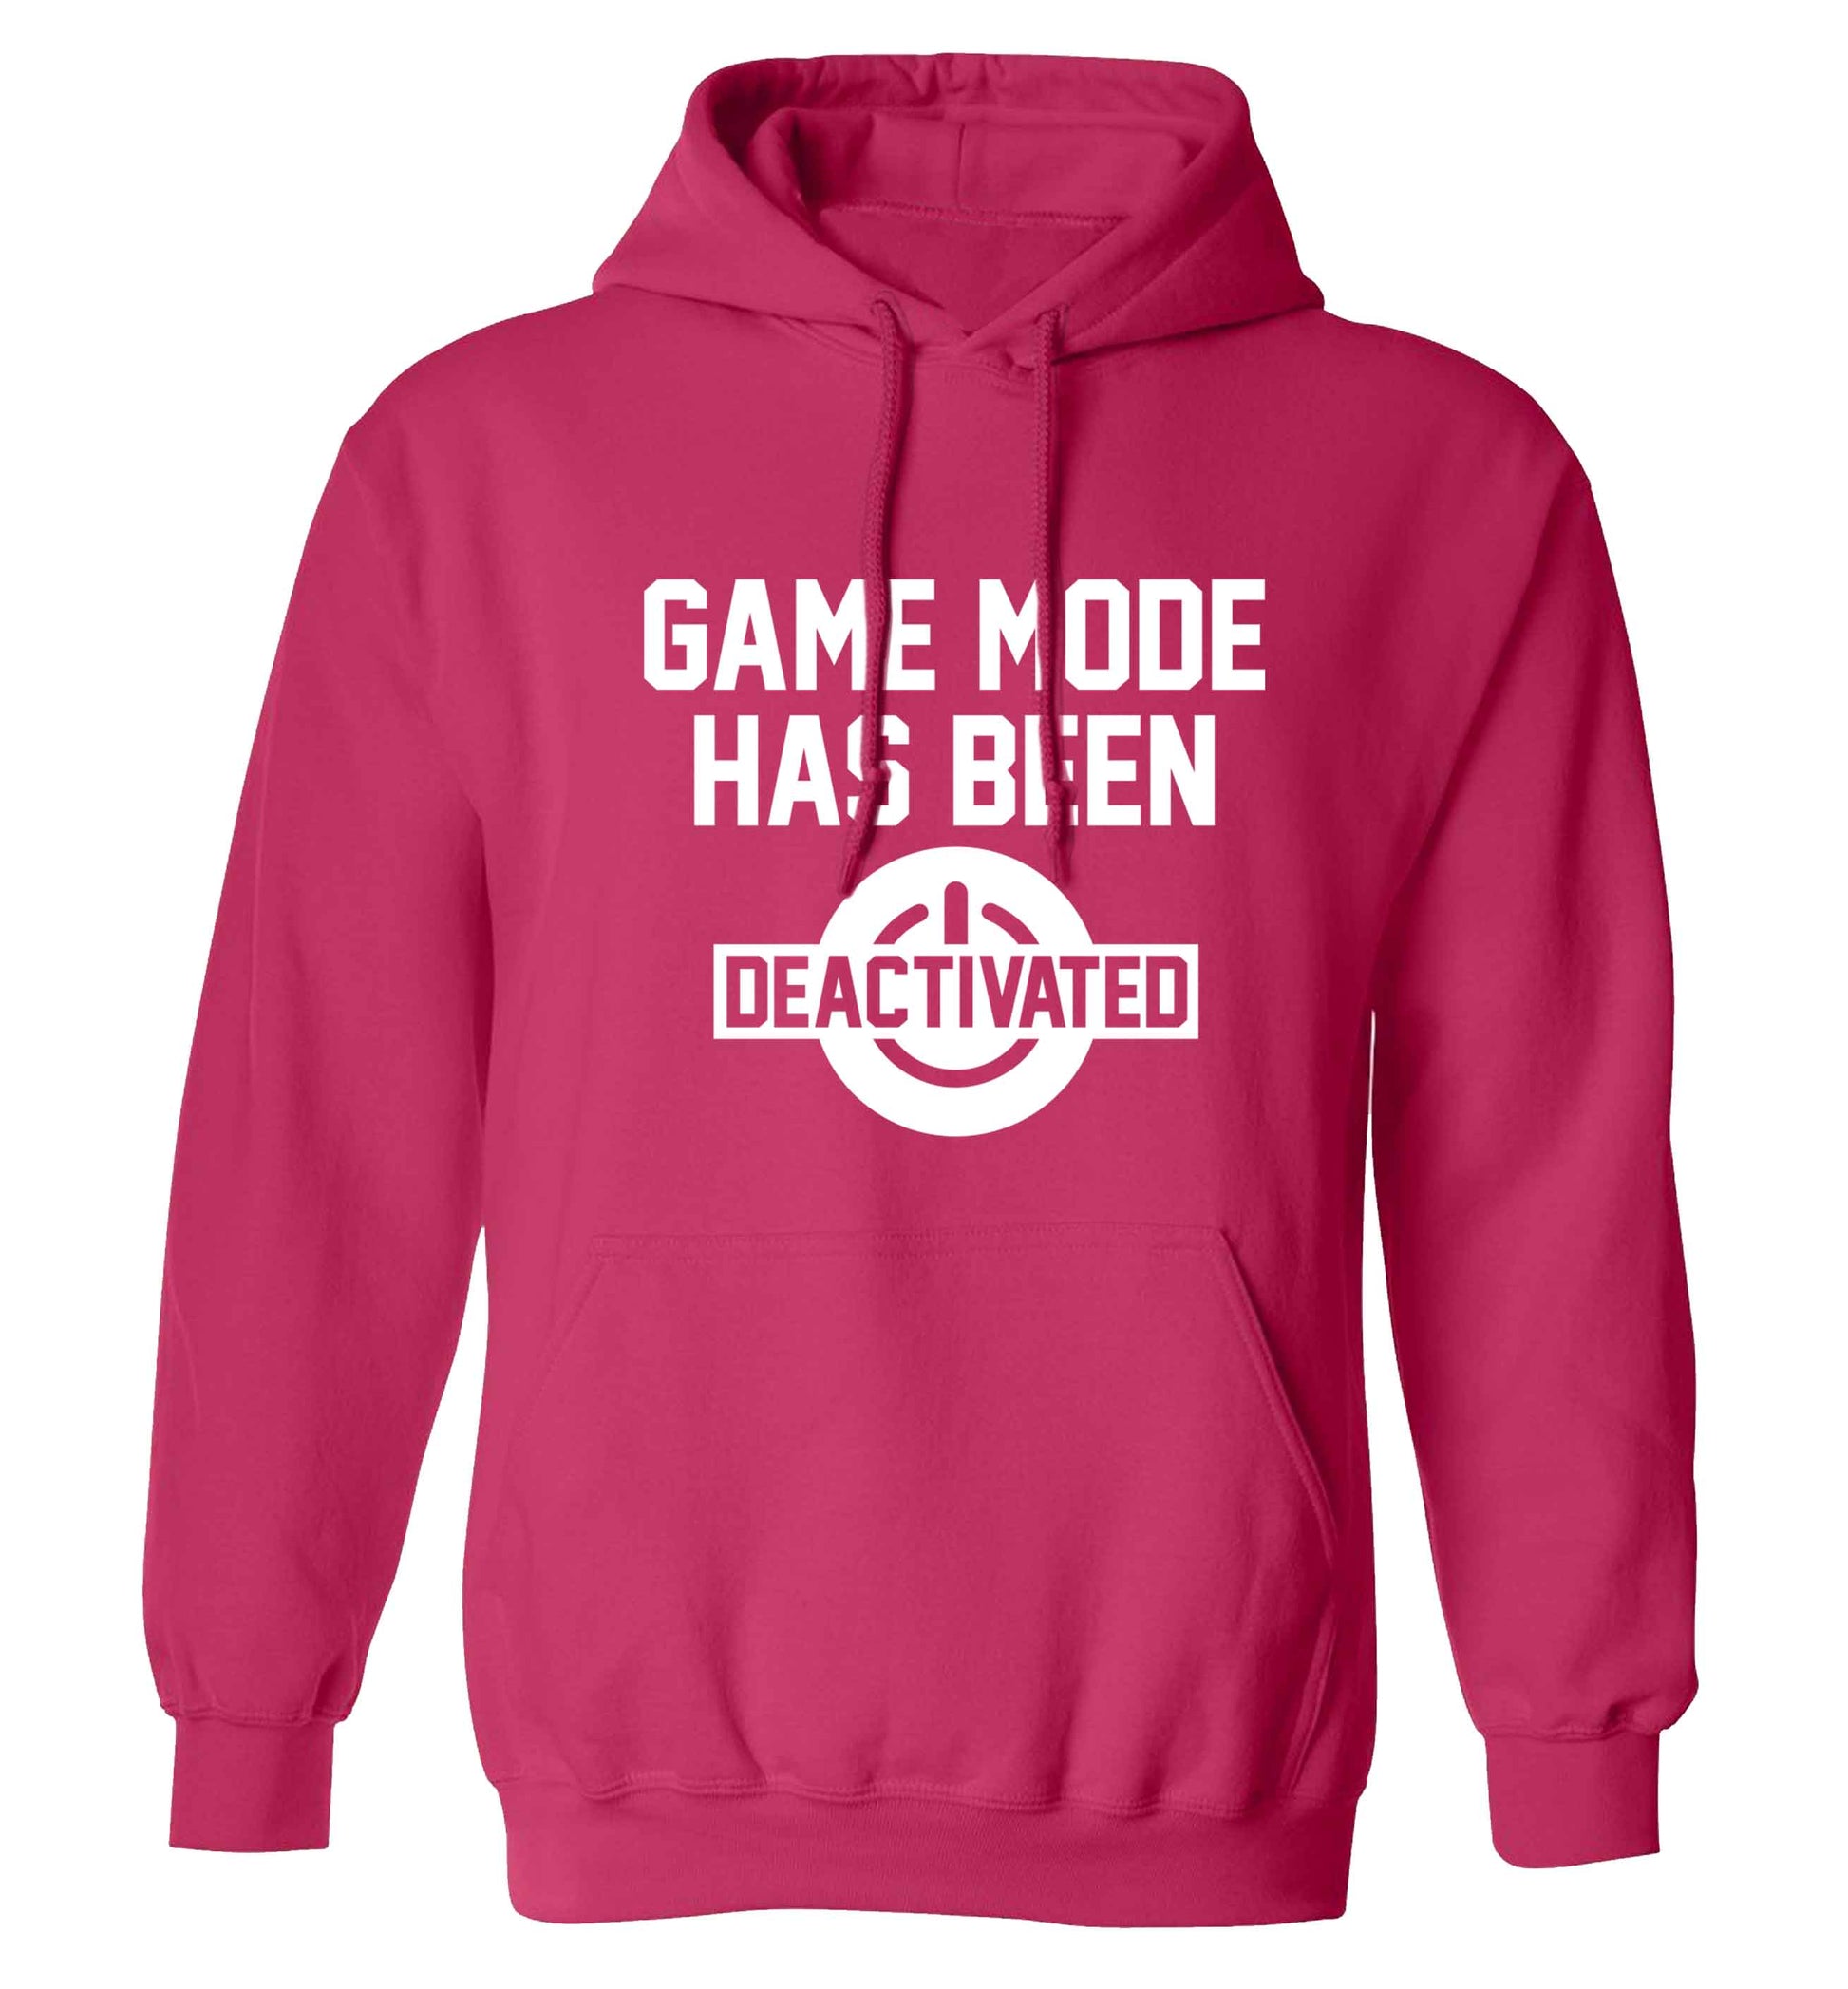 Game Mode Has Been Deactivated adults unisex pink hoodie 2XL